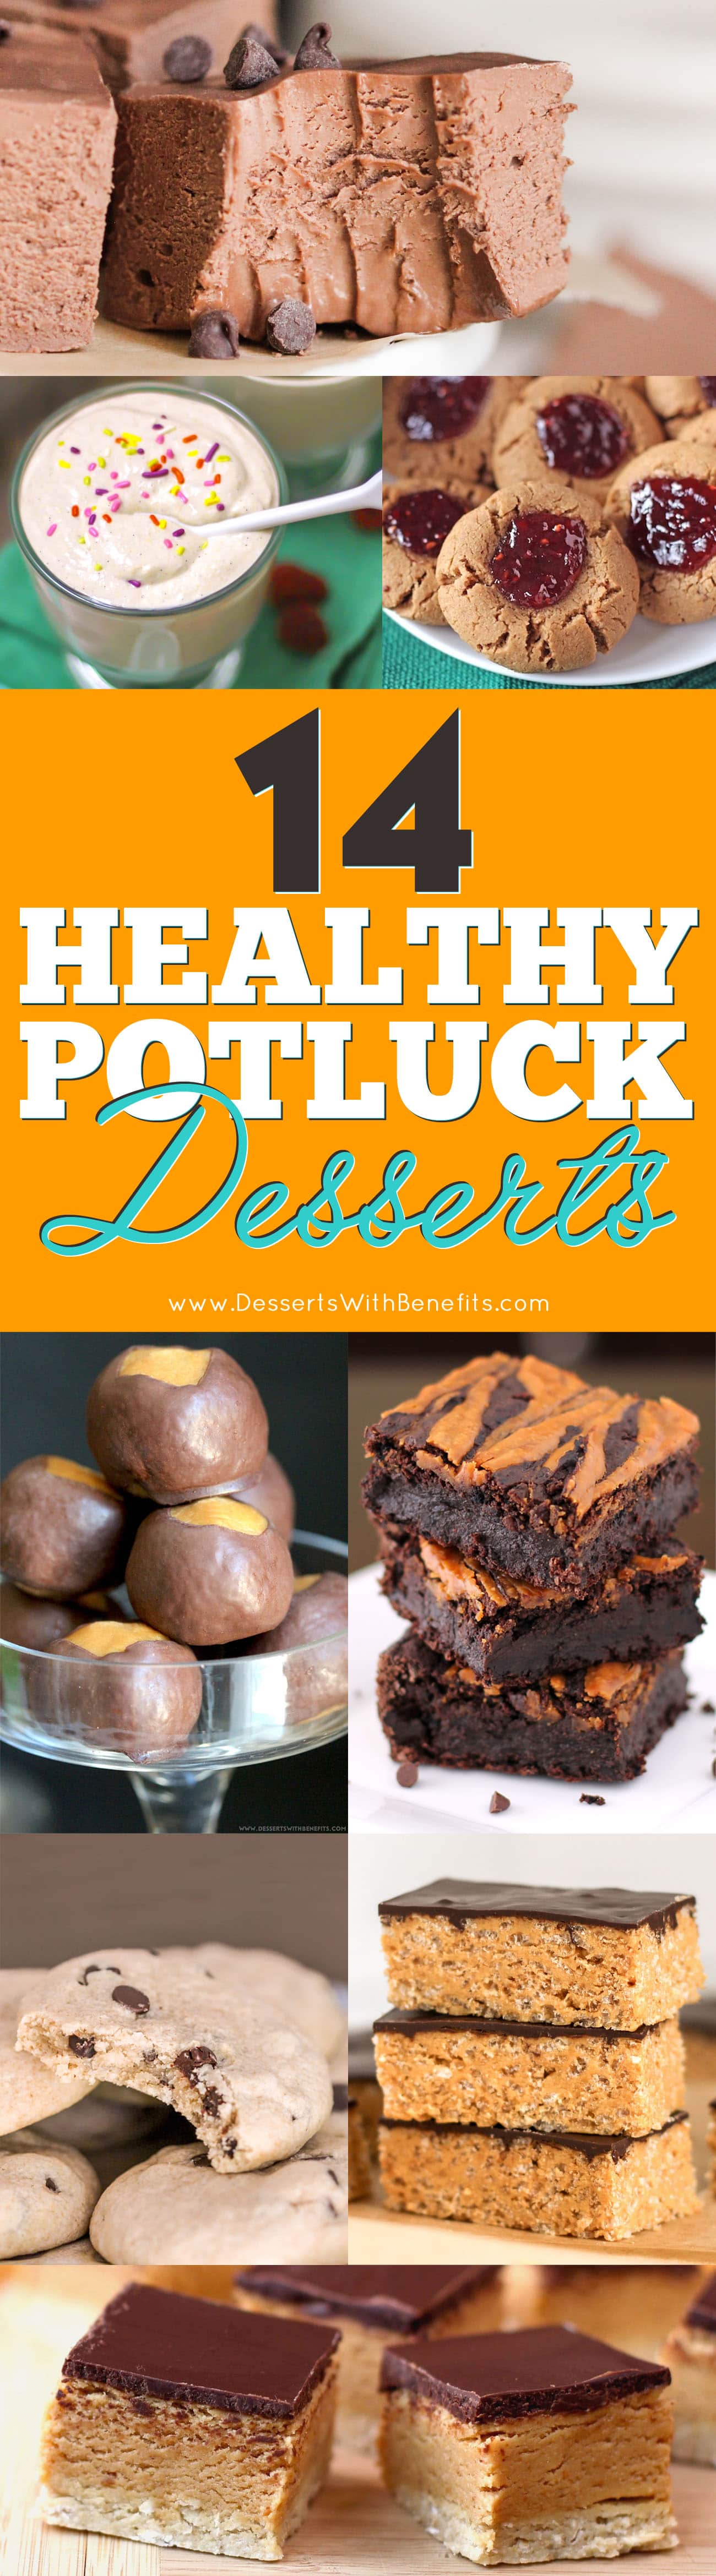 Healthy Potluck Dessert Recipes: Potlucks don't have to be unhealthy when you've got these 14 tasty and healthy potluck dessert recipes! They're perfect for all types of get togethers, potlucks, and parties, and they’re guaranteed to please a crowd -- Healthy Dessert Recipes at Desserts with Benefits